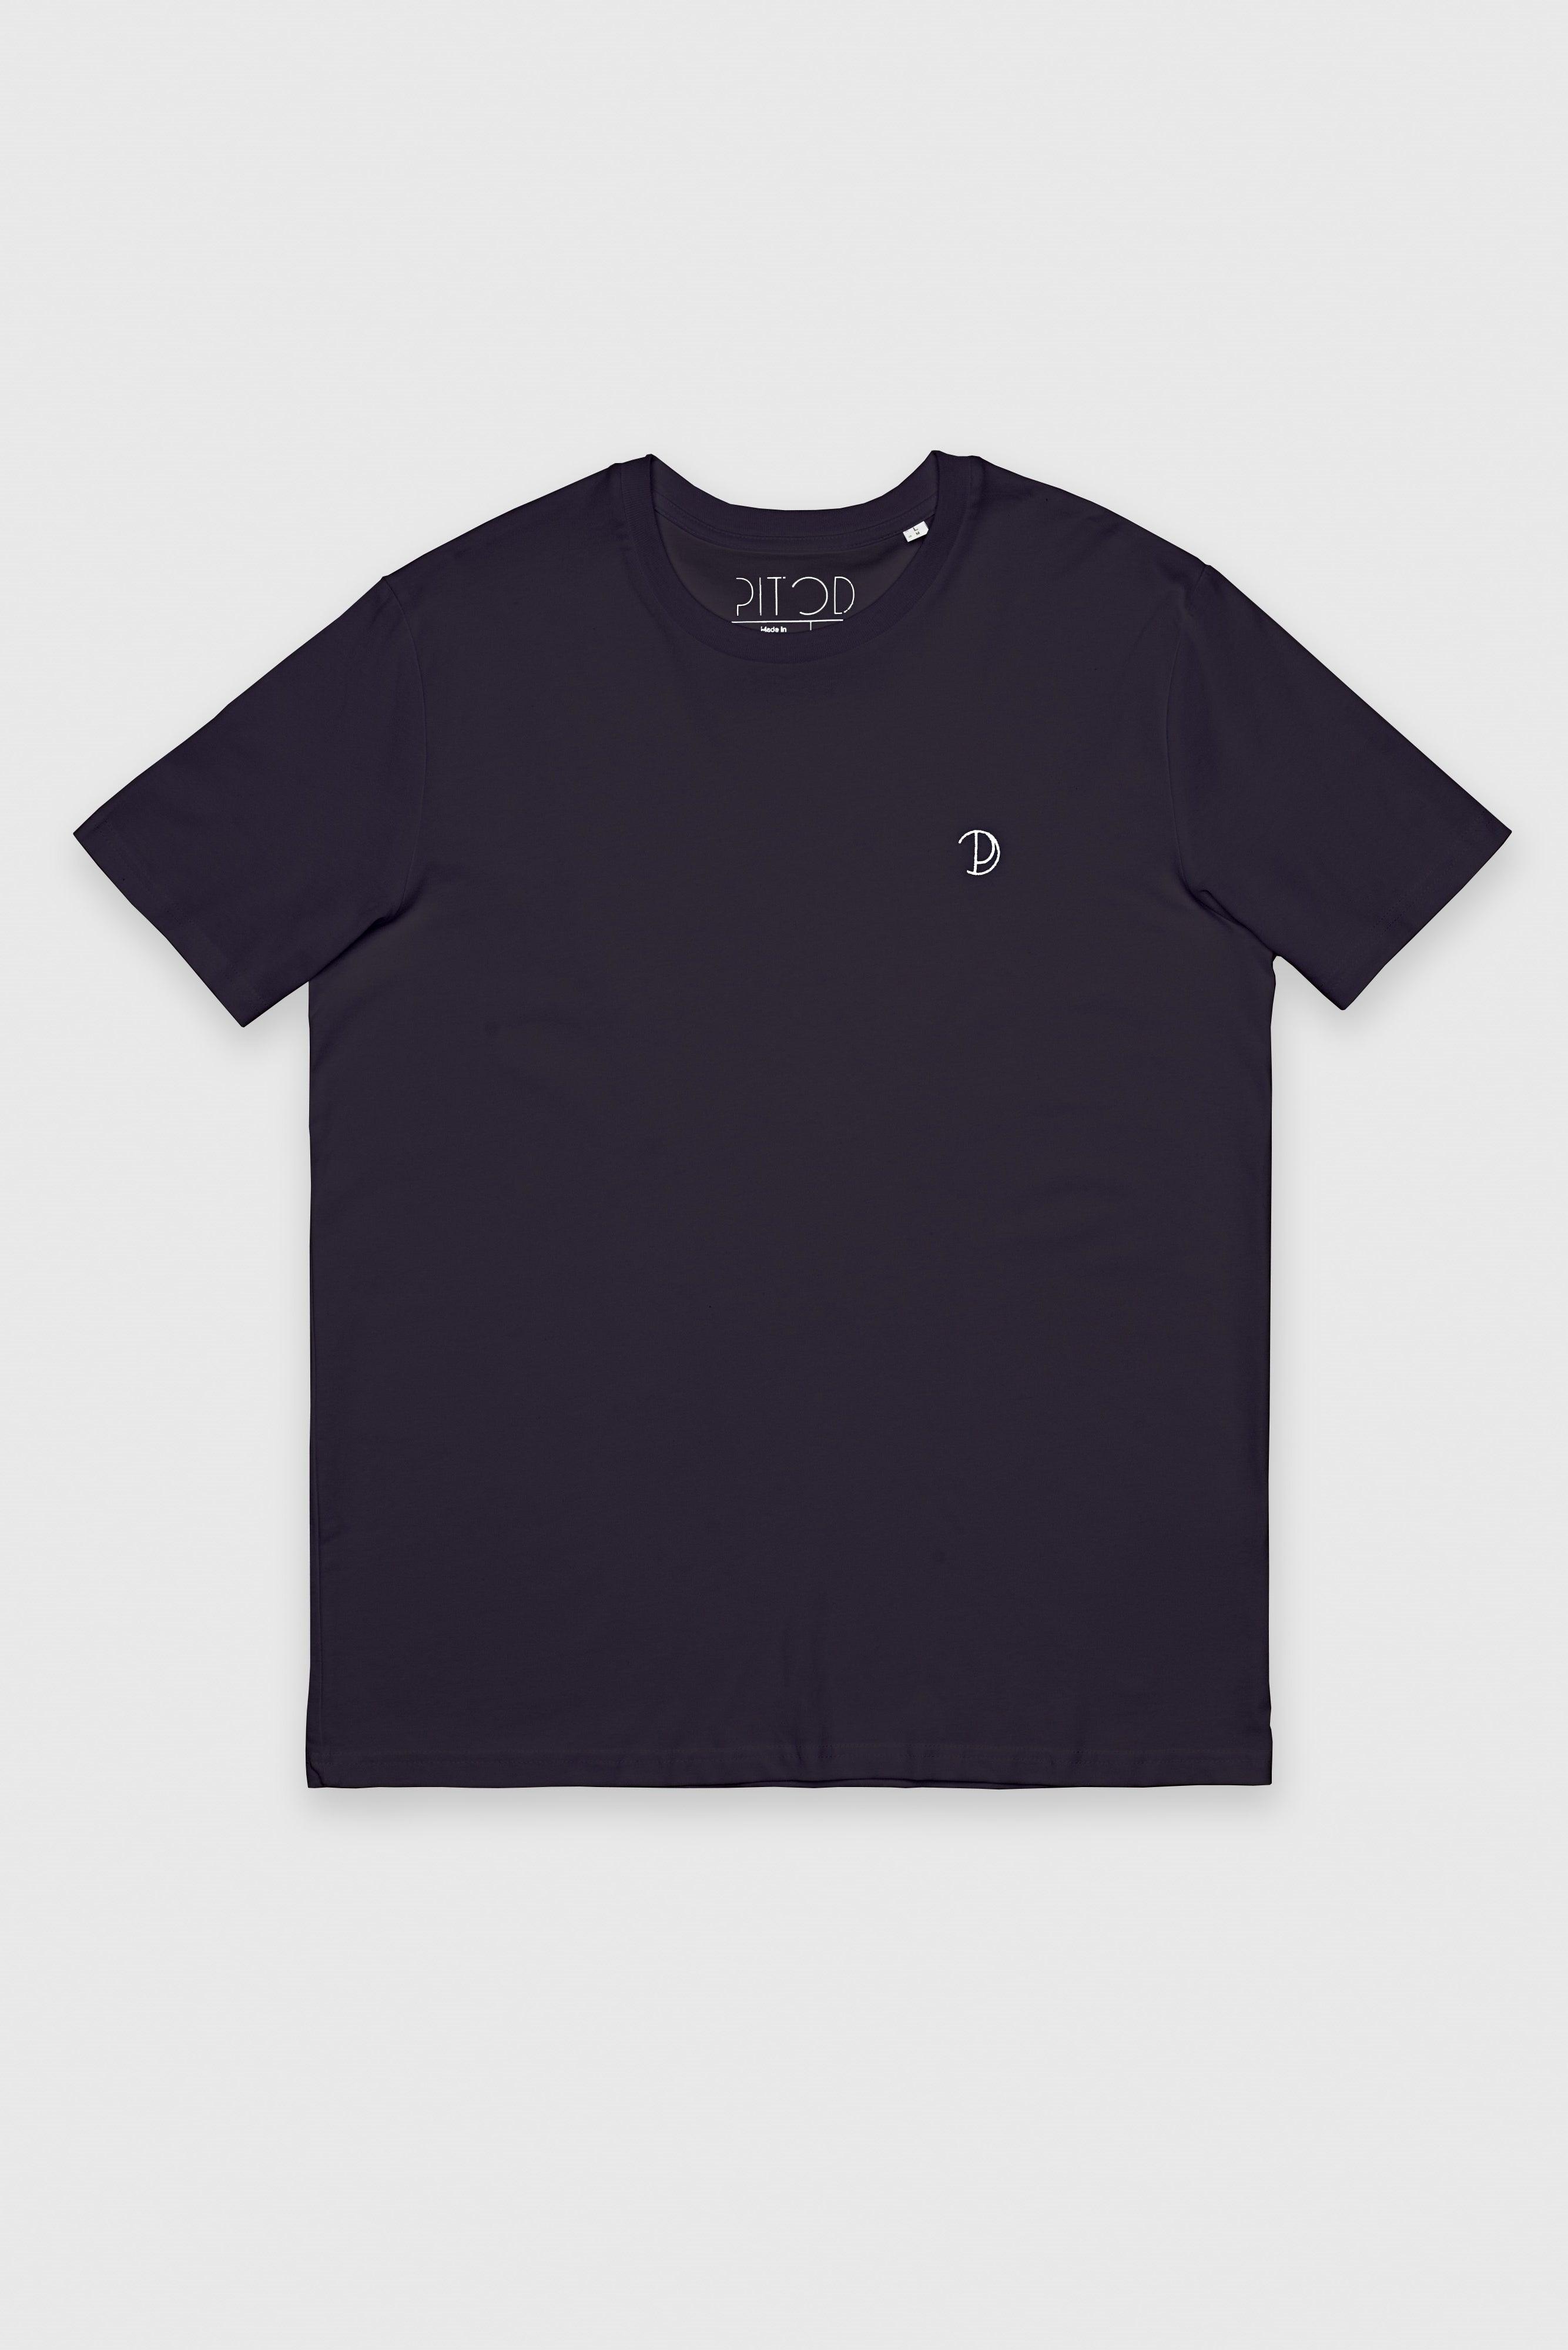 Product picture of Anthracite Chest Logo T-Shirt